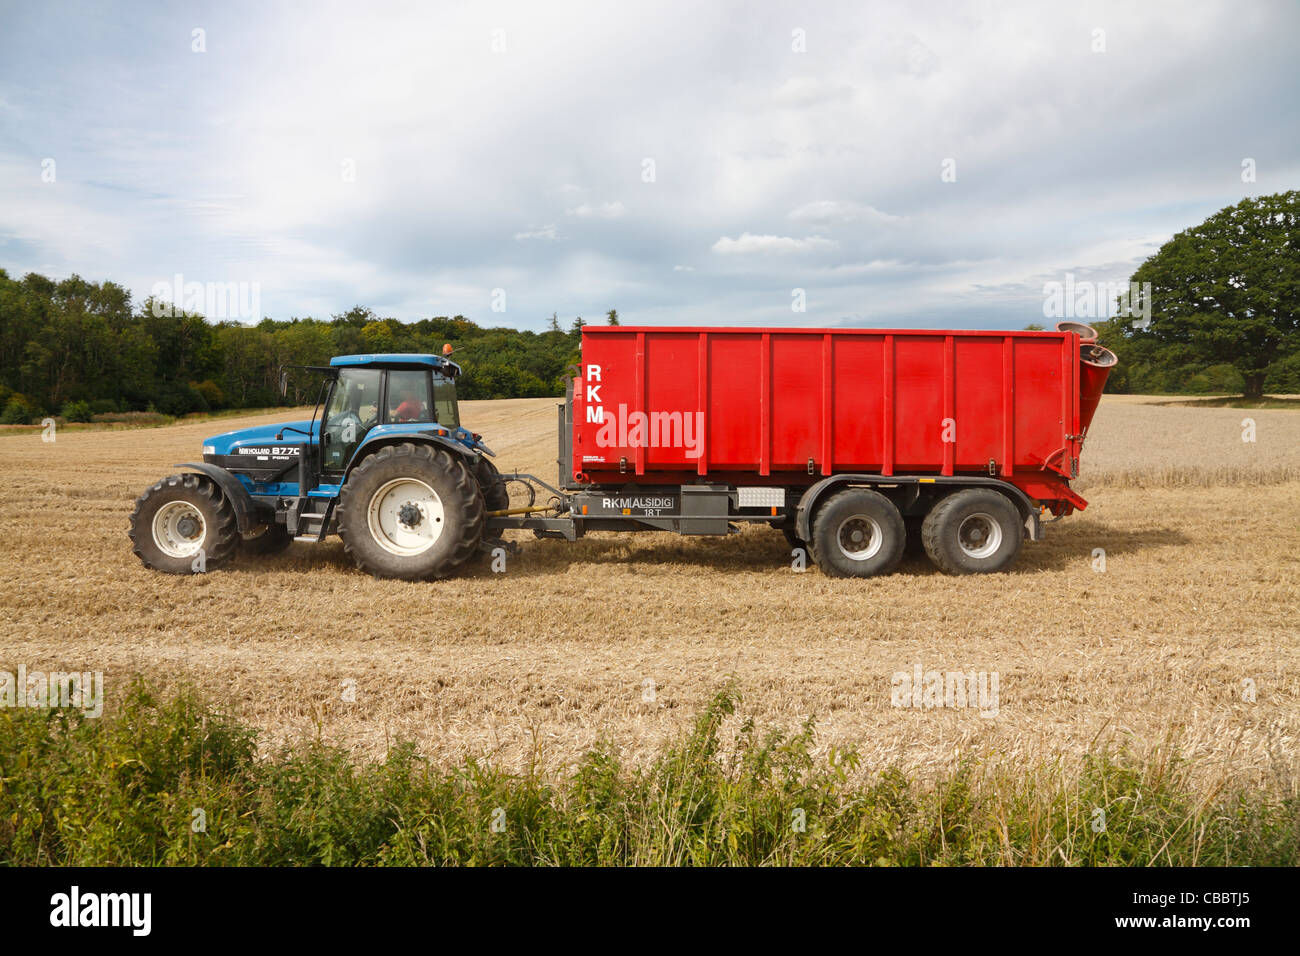 Tractor and trailer waiting for a load of wheat from a combine harvester harvesting the field before the weather changes Stock Photo